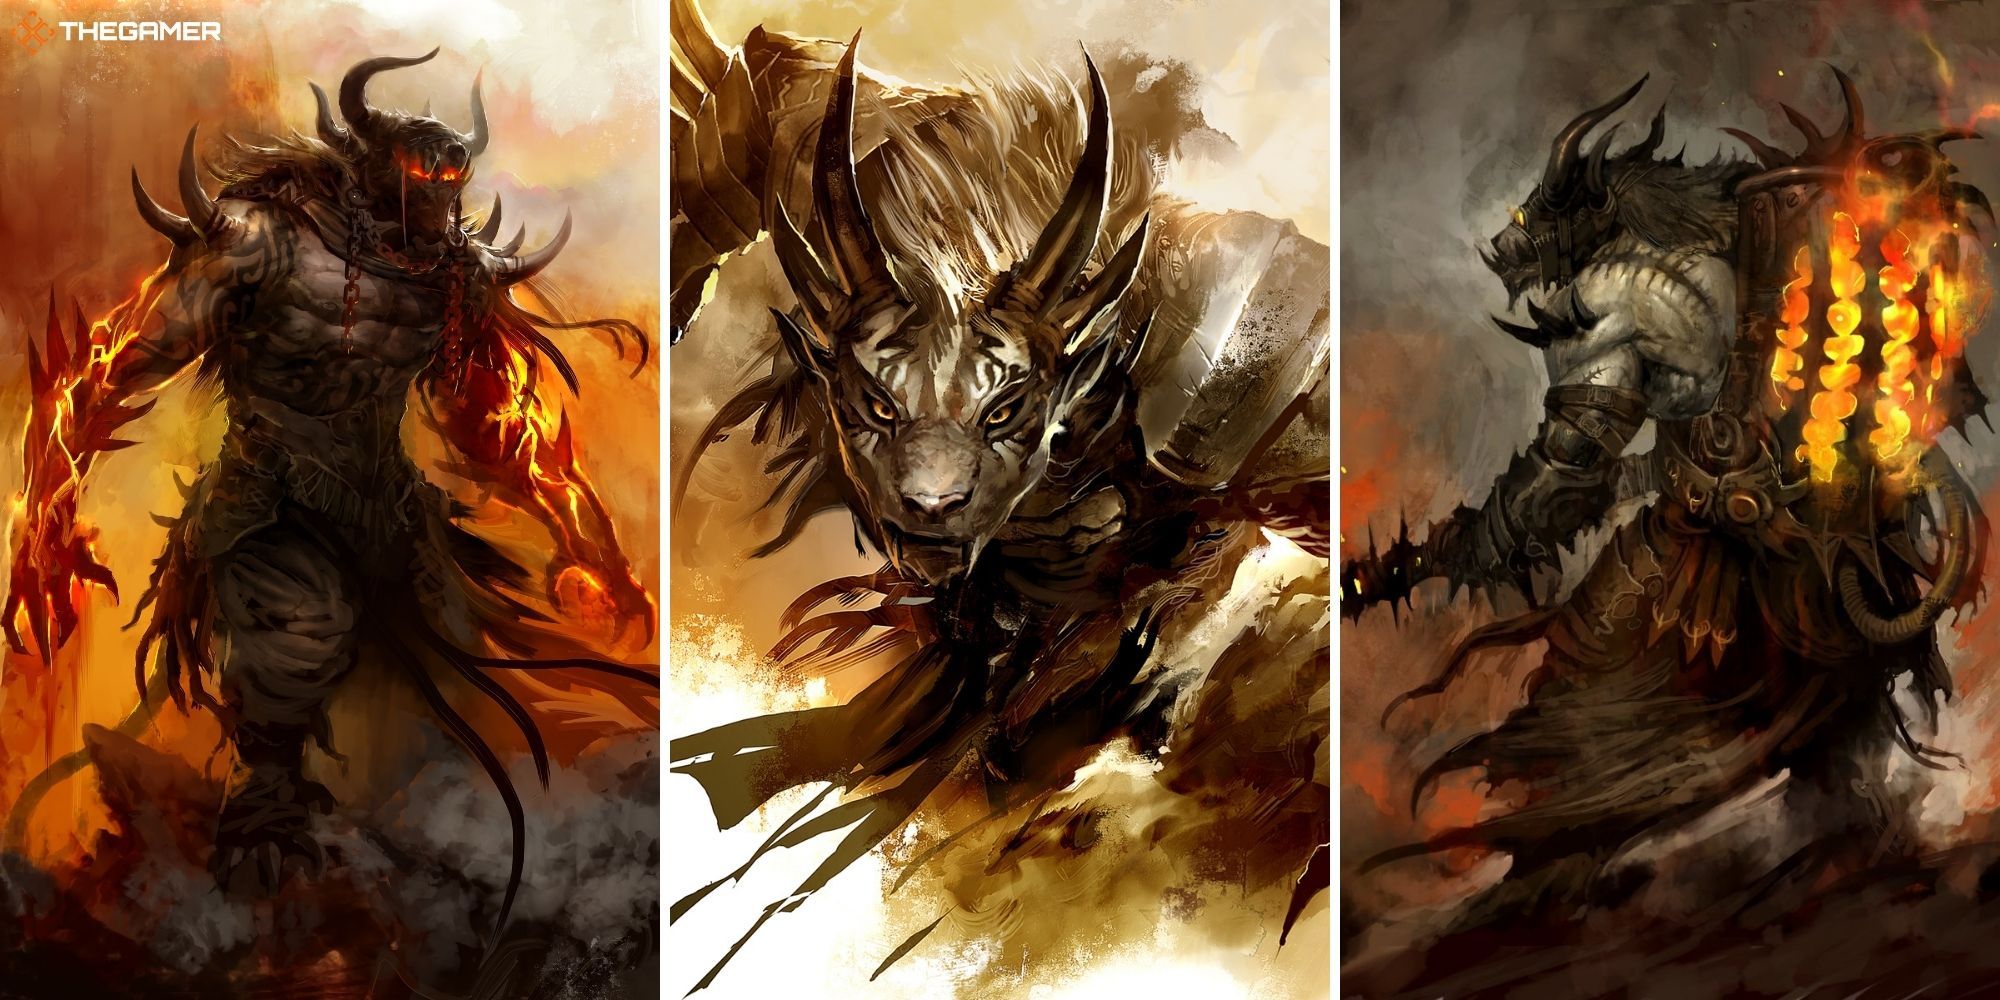 Guild Wars 2 - Official Art of Charr